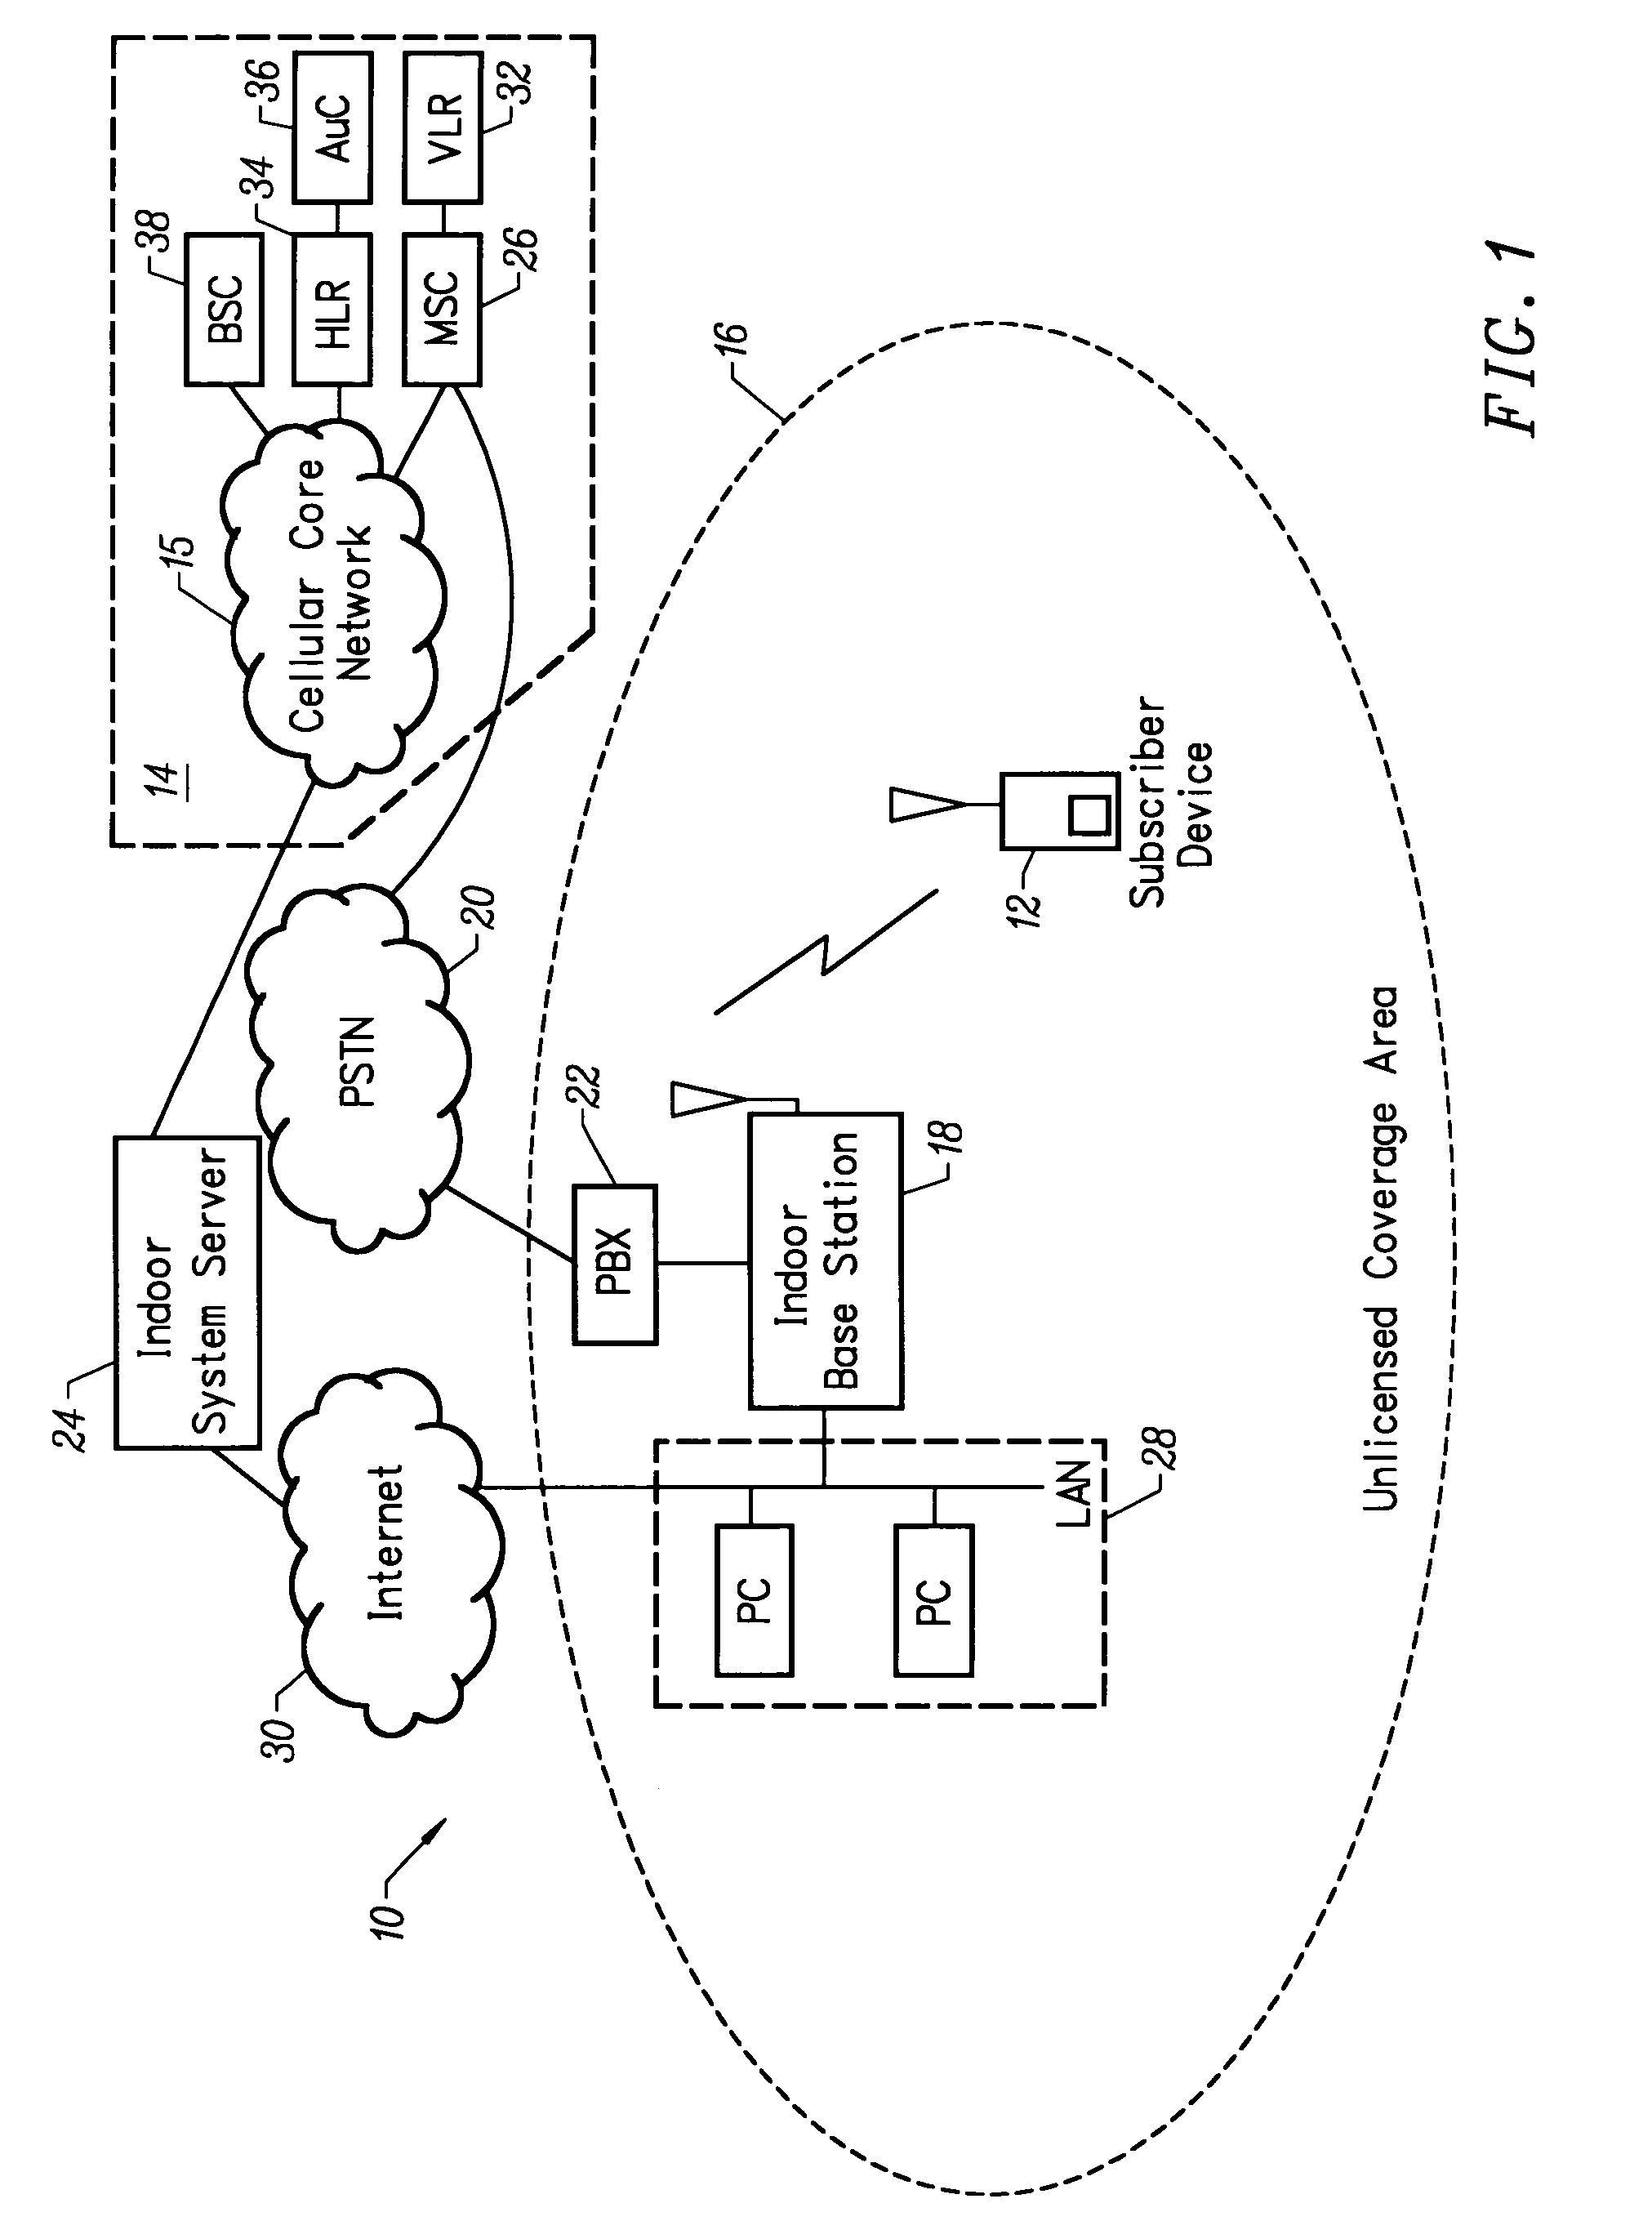 Apparatus for supporting the handover of a telecommunication session between a licensed wireless system and an unlicensed wireless system